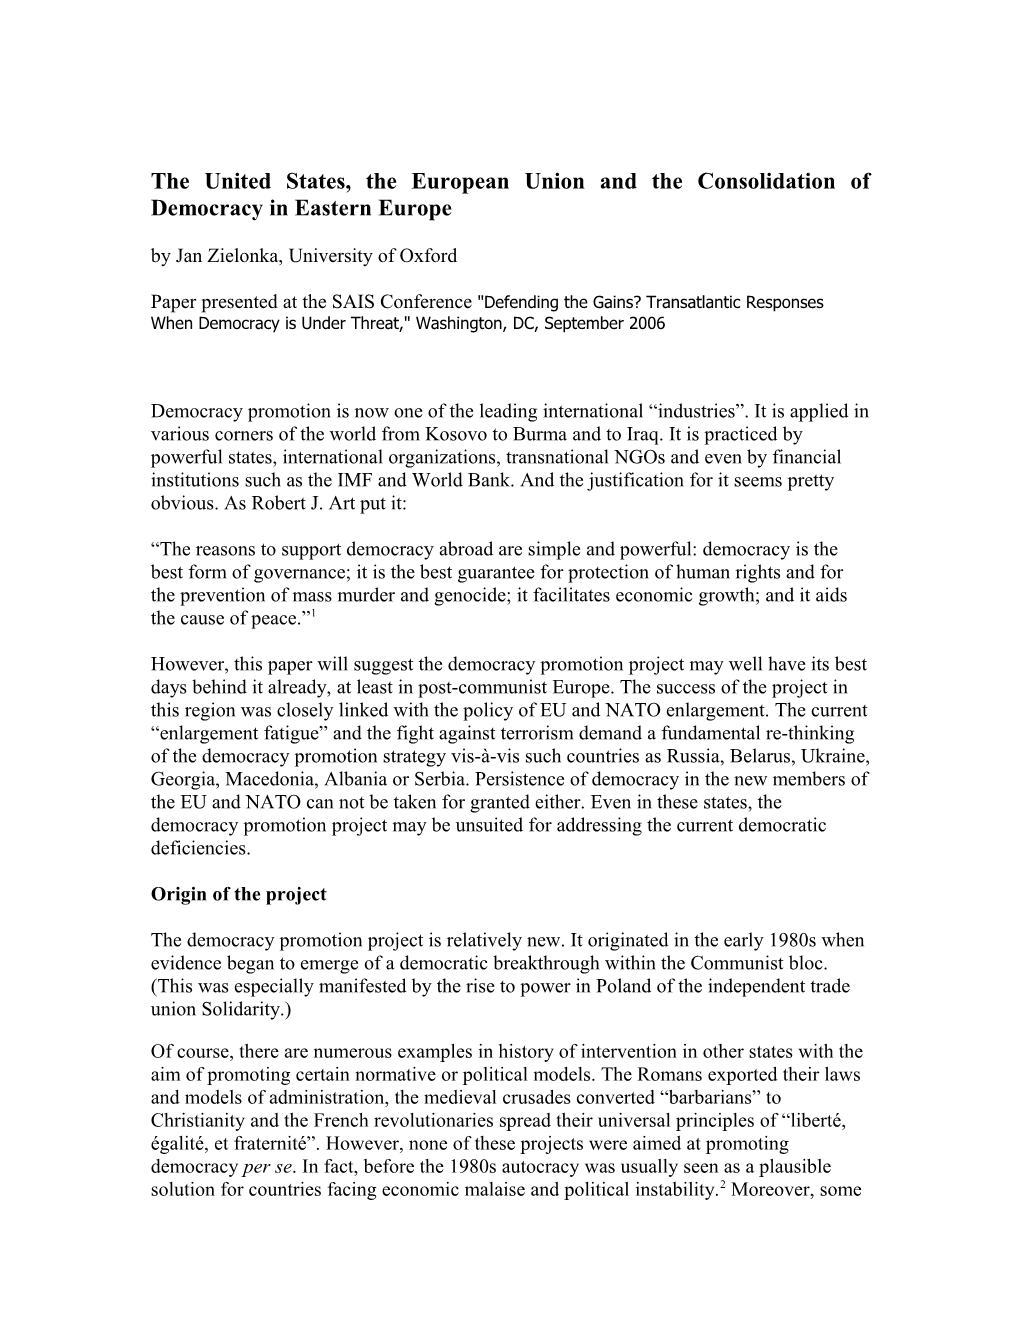 The United States, the European Union and the Consolidation of Democracy in Eastern Europe